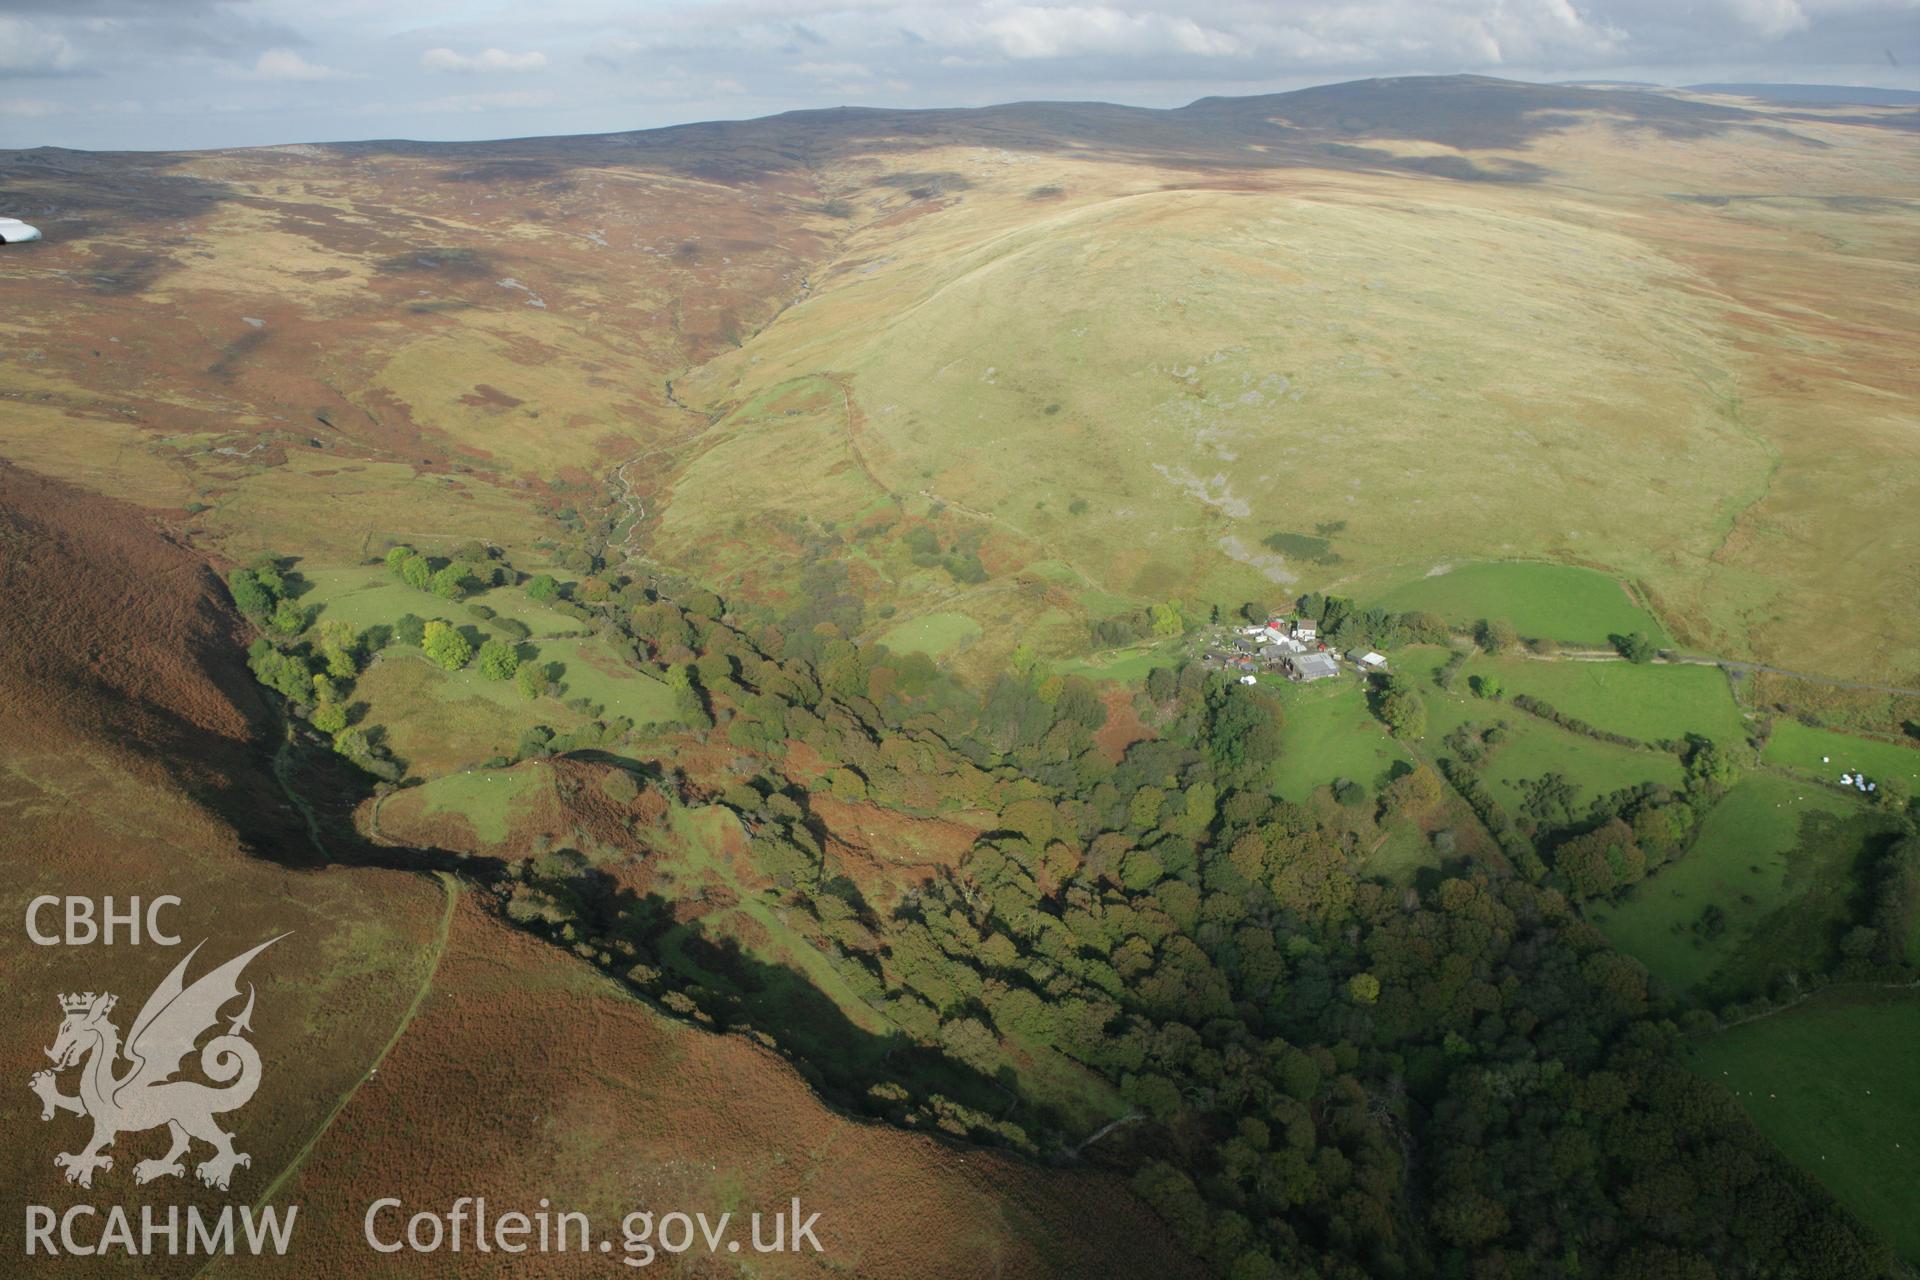 RCAHMW colour oblique aerial photograph of Pantyffynnon Valley Enclosures. Taken on 14 October 2009 by Toby Driver